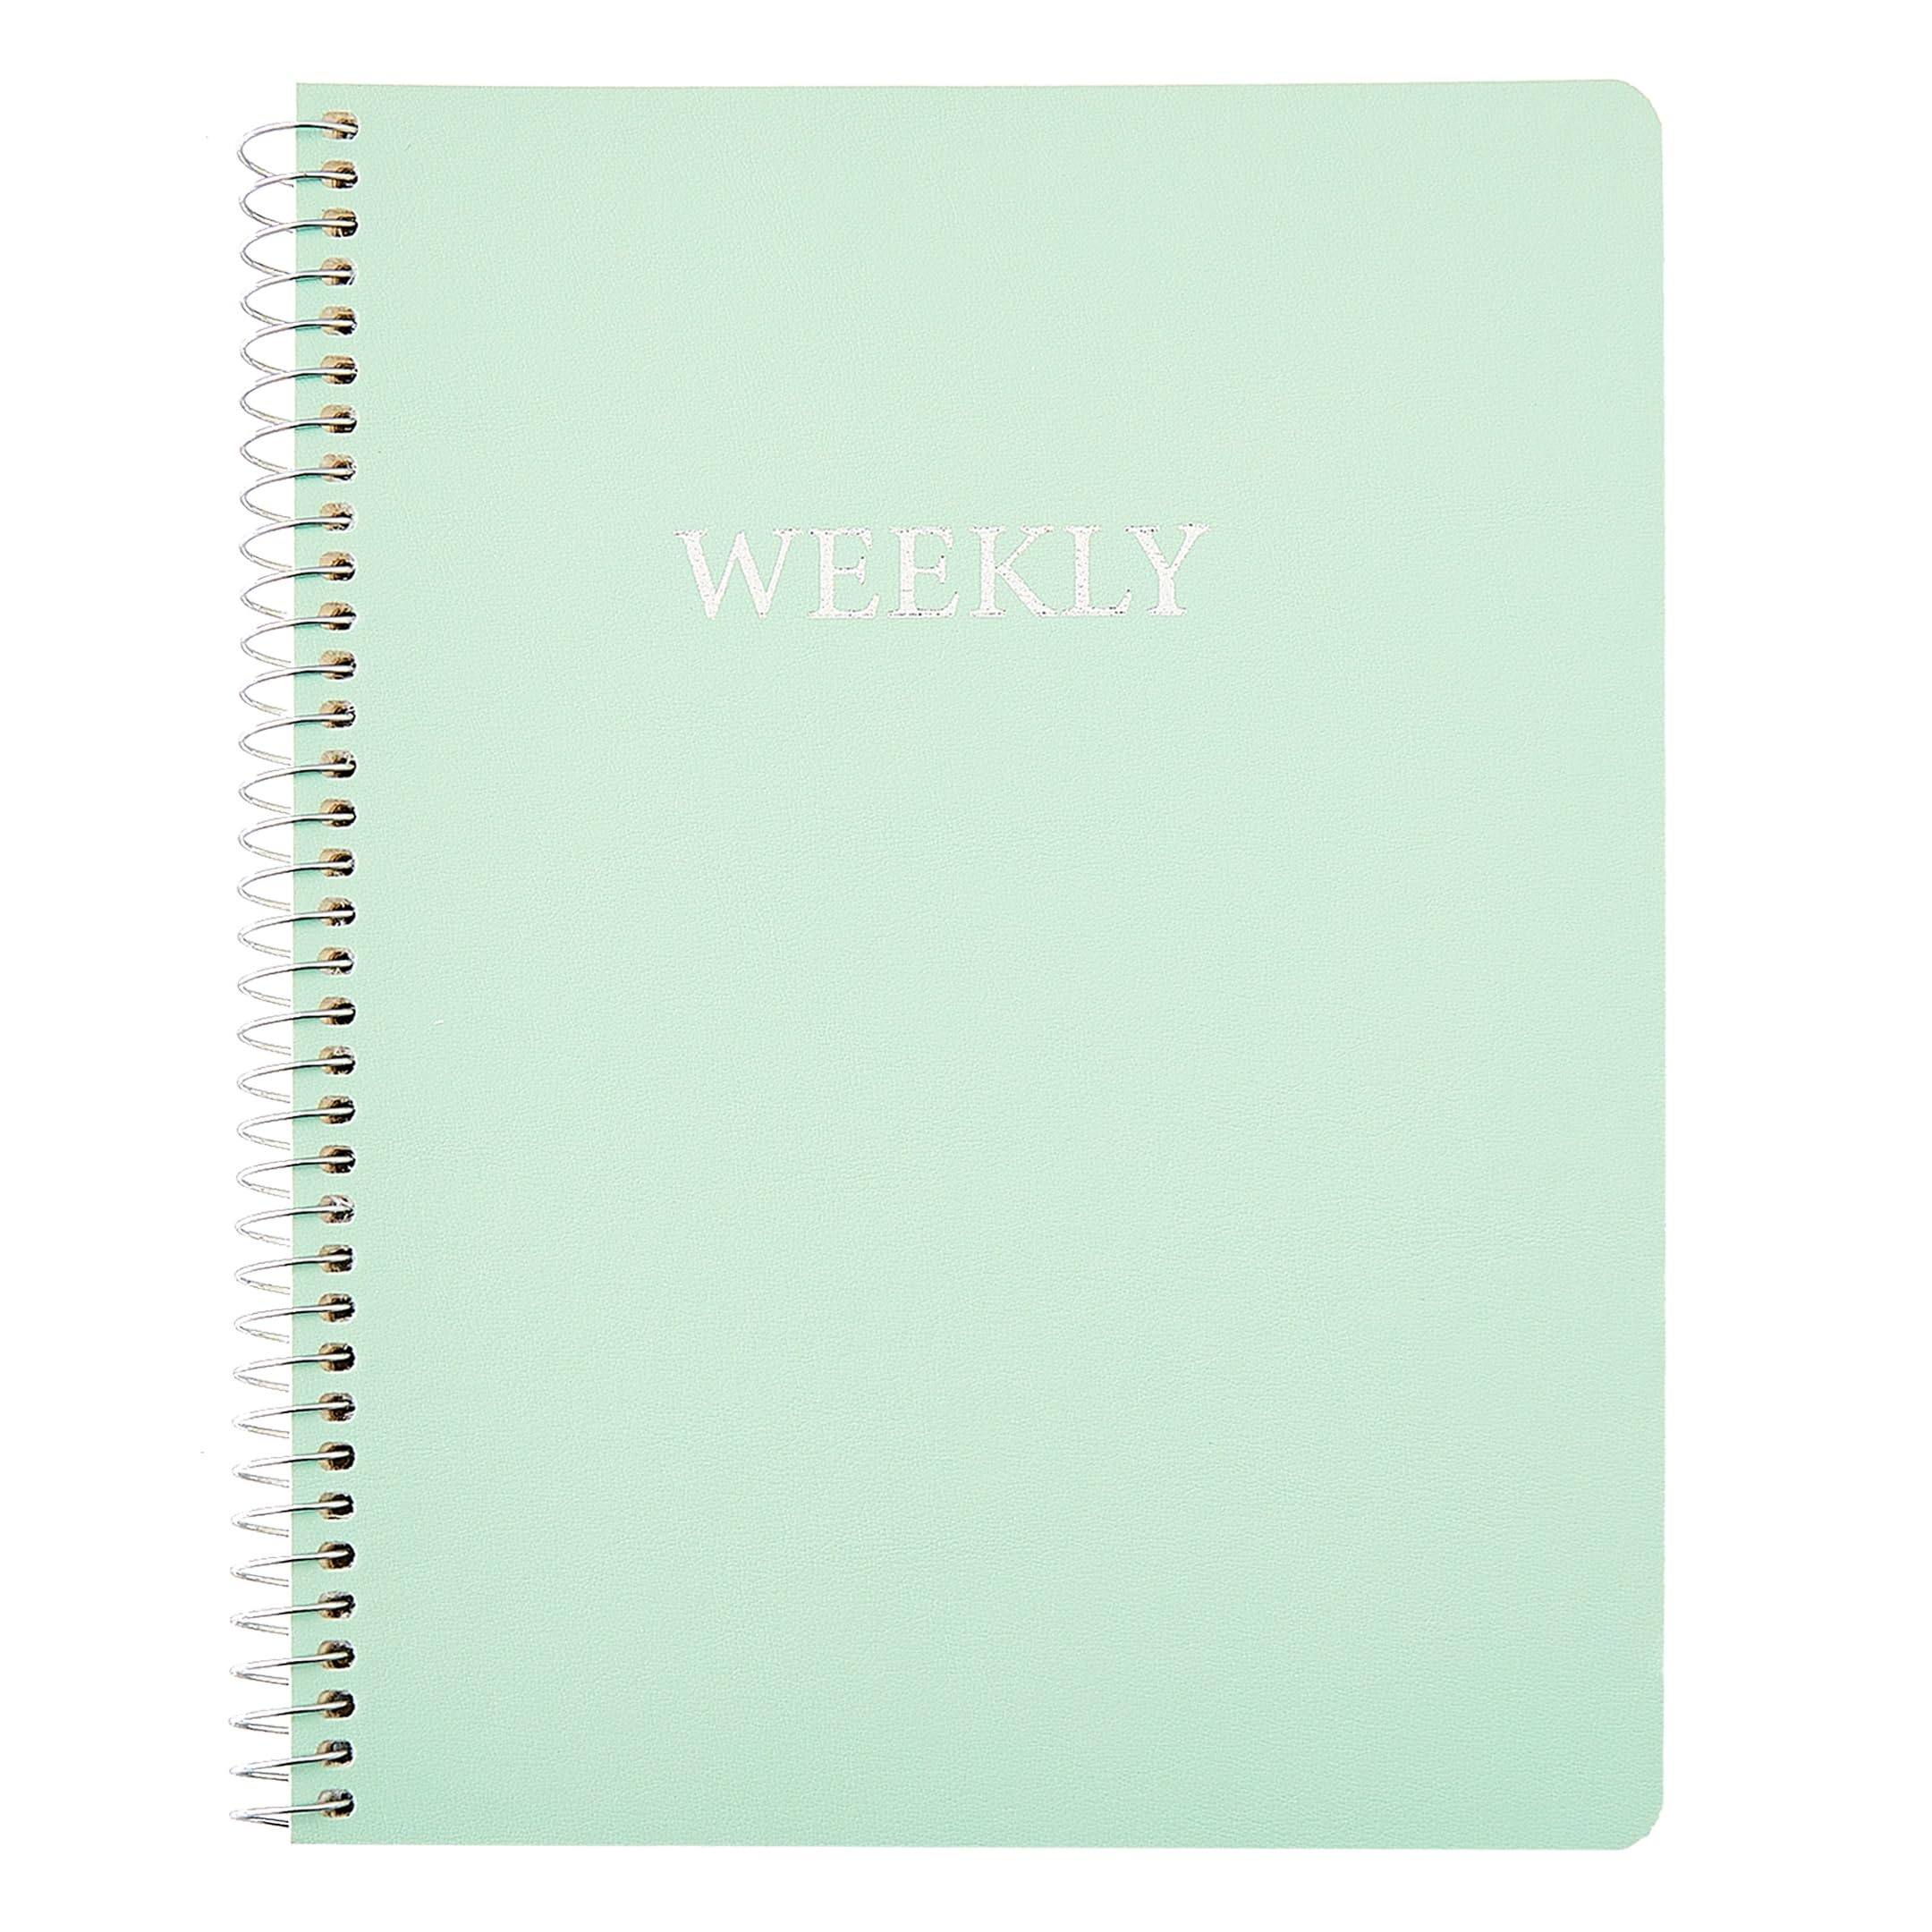 TSFPapier Undated Weekly and Monthly Note book Planner for 2024 and 2025, Soft Cover Daily to Do List Organizer Appointment Journal Schedule Spiral Notebook, 8.9x7.1 inch, MintGreen